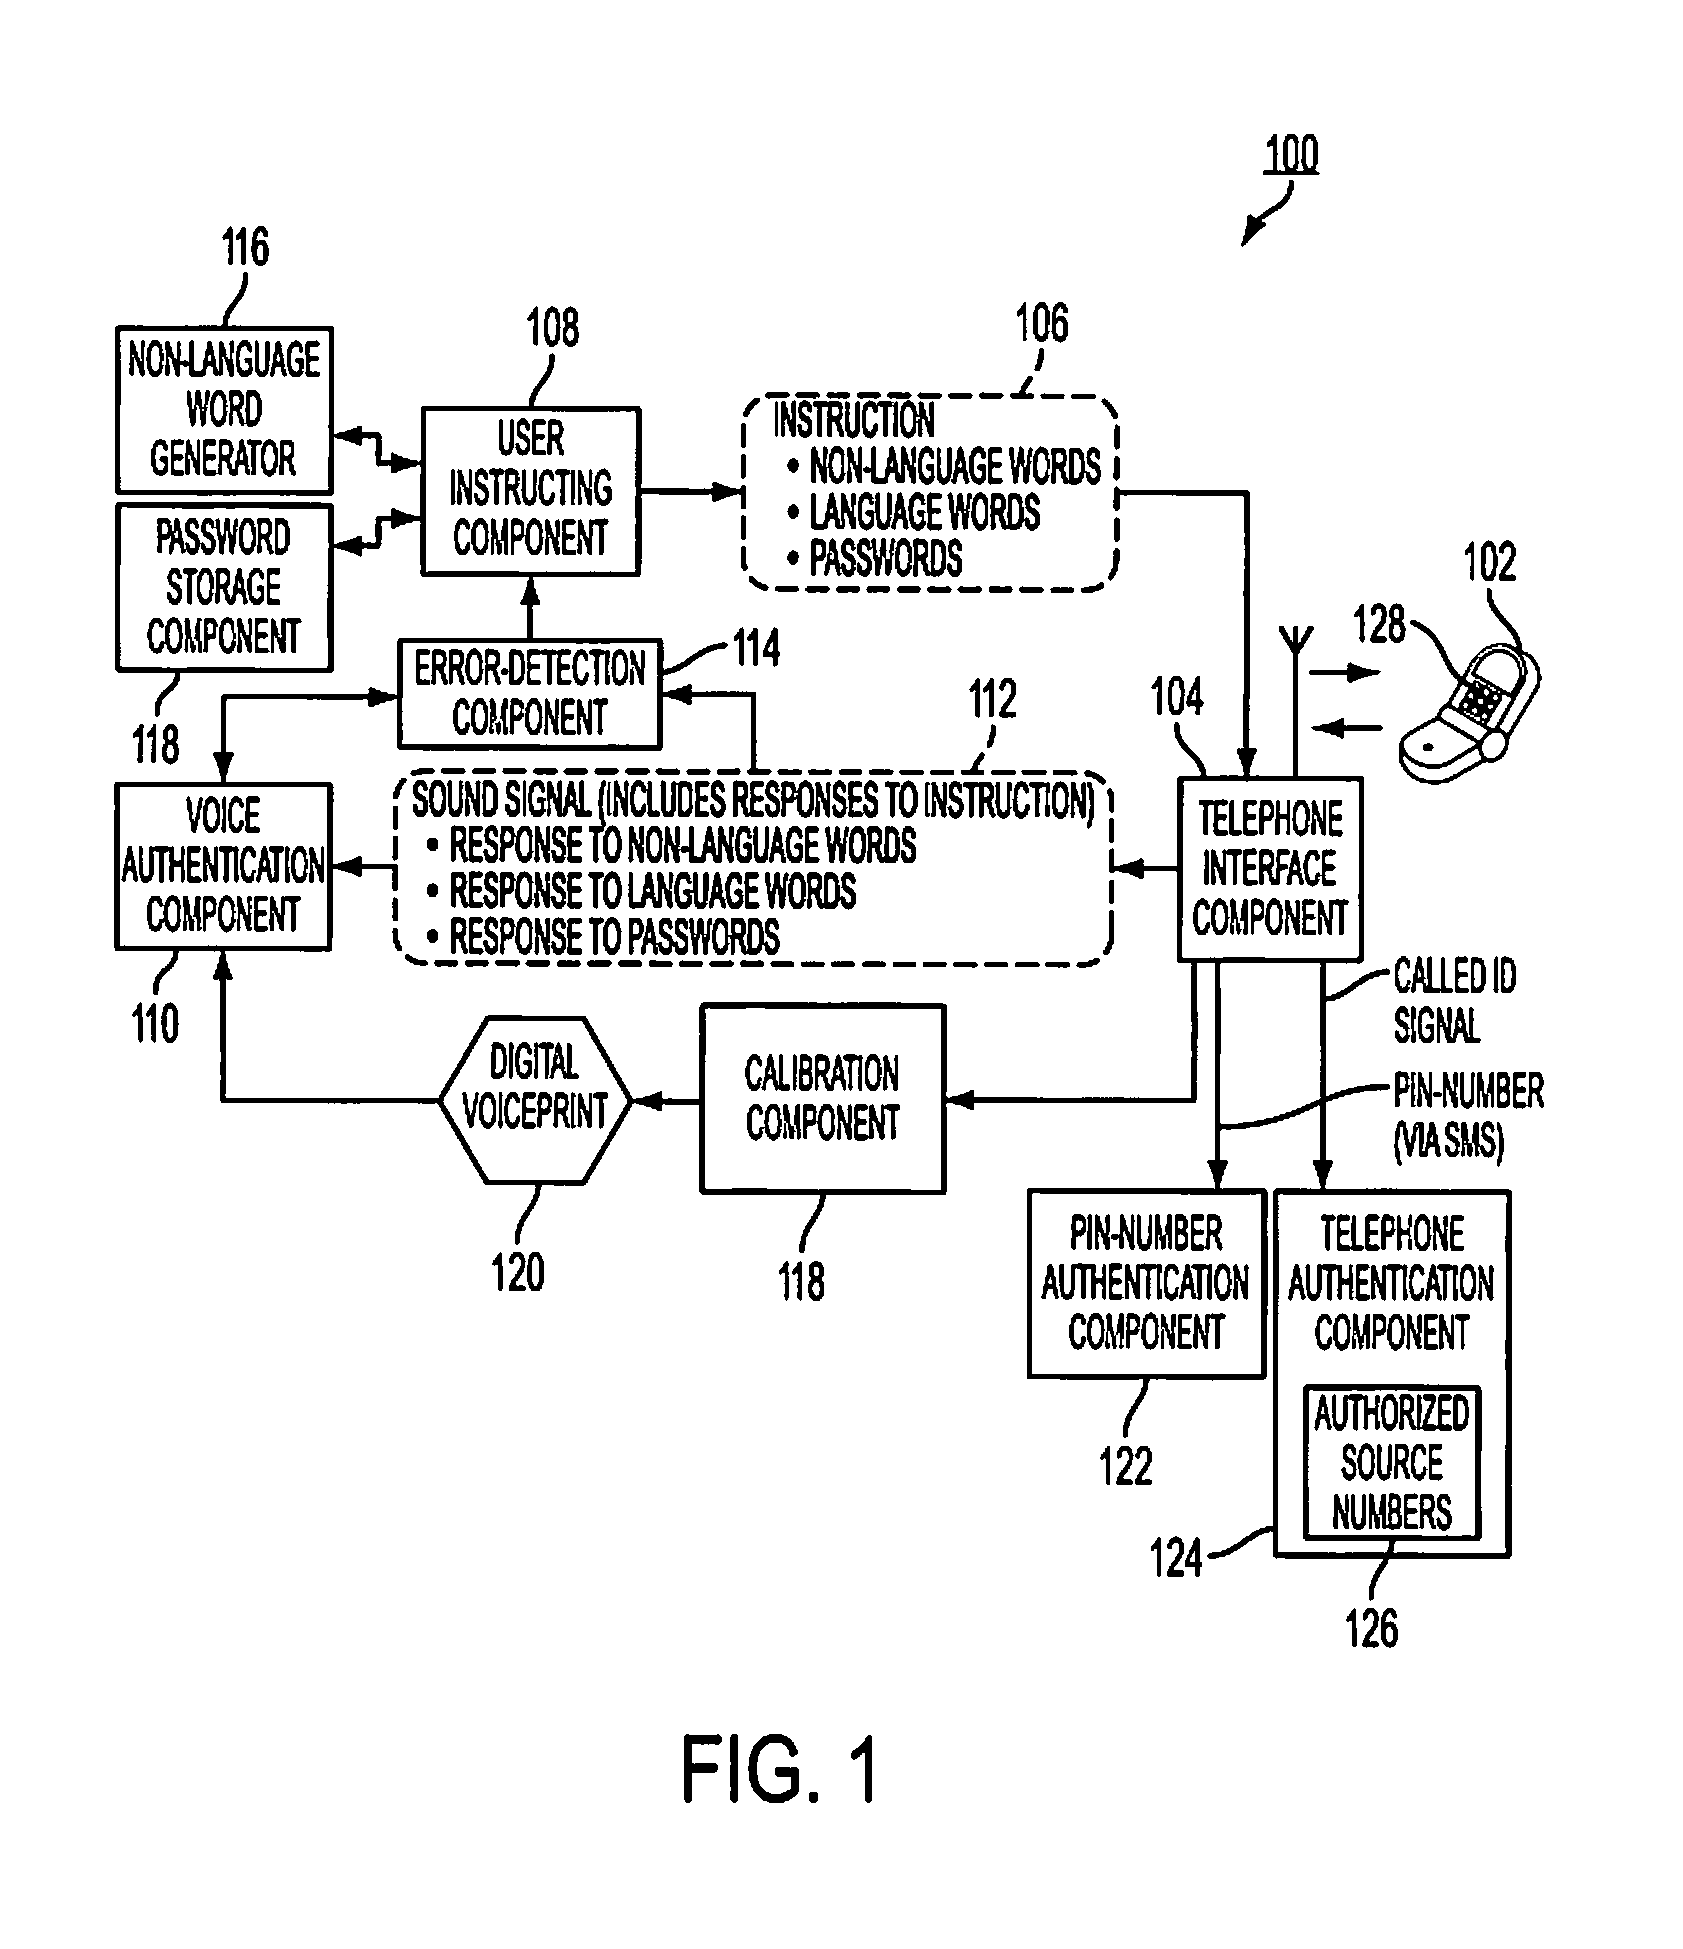 System and method for user authentification using non-language words